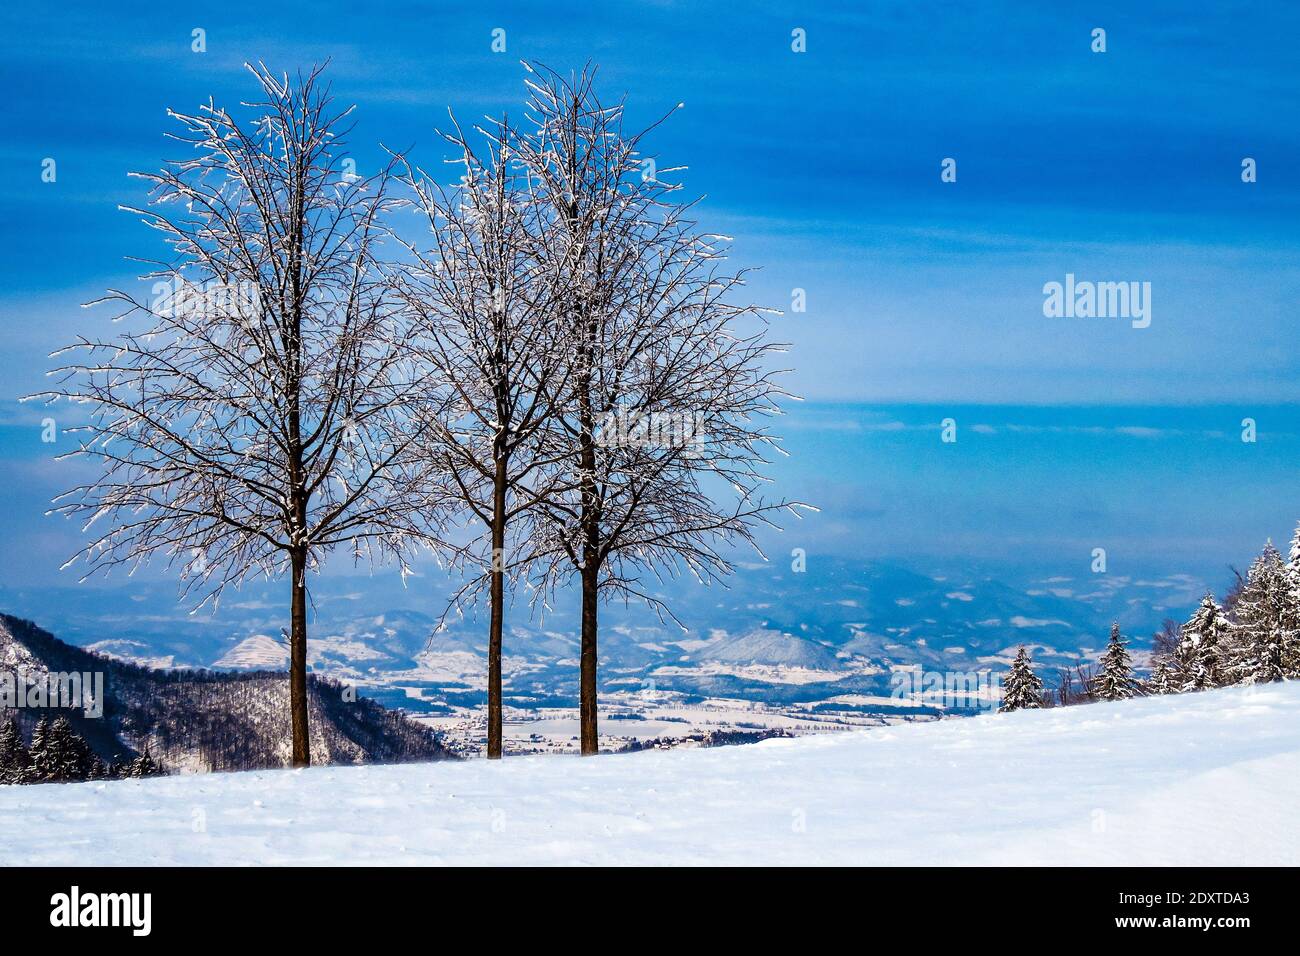 Bare Trees On Snow Covered Landscape Against Blue Sky Stock Photo